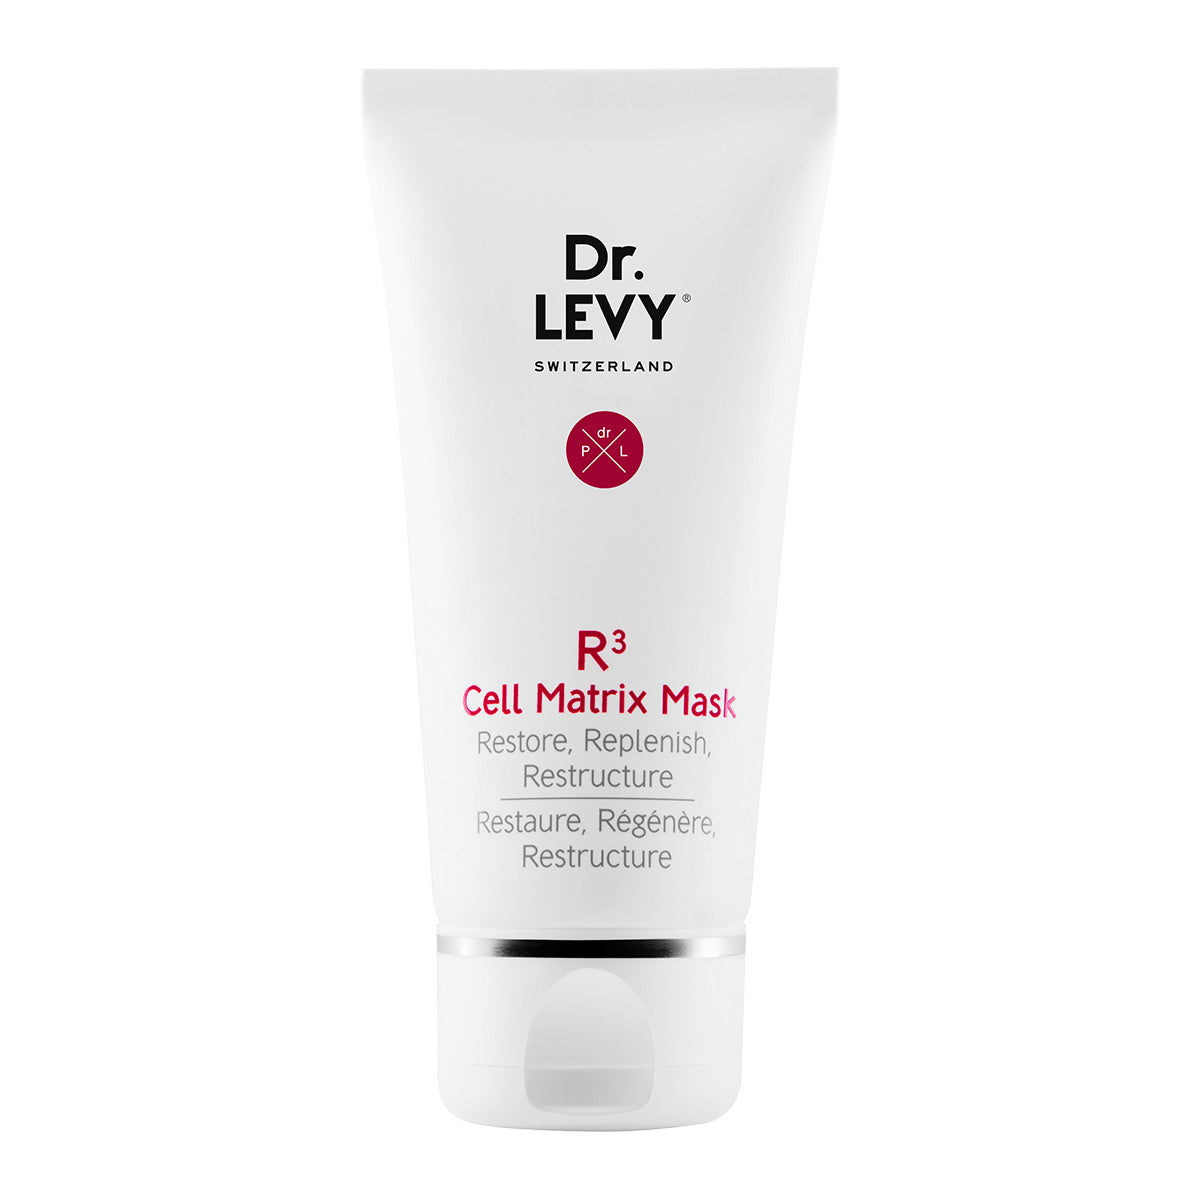 Dr. Levy R3 Cell Matrix Mask 50 ml